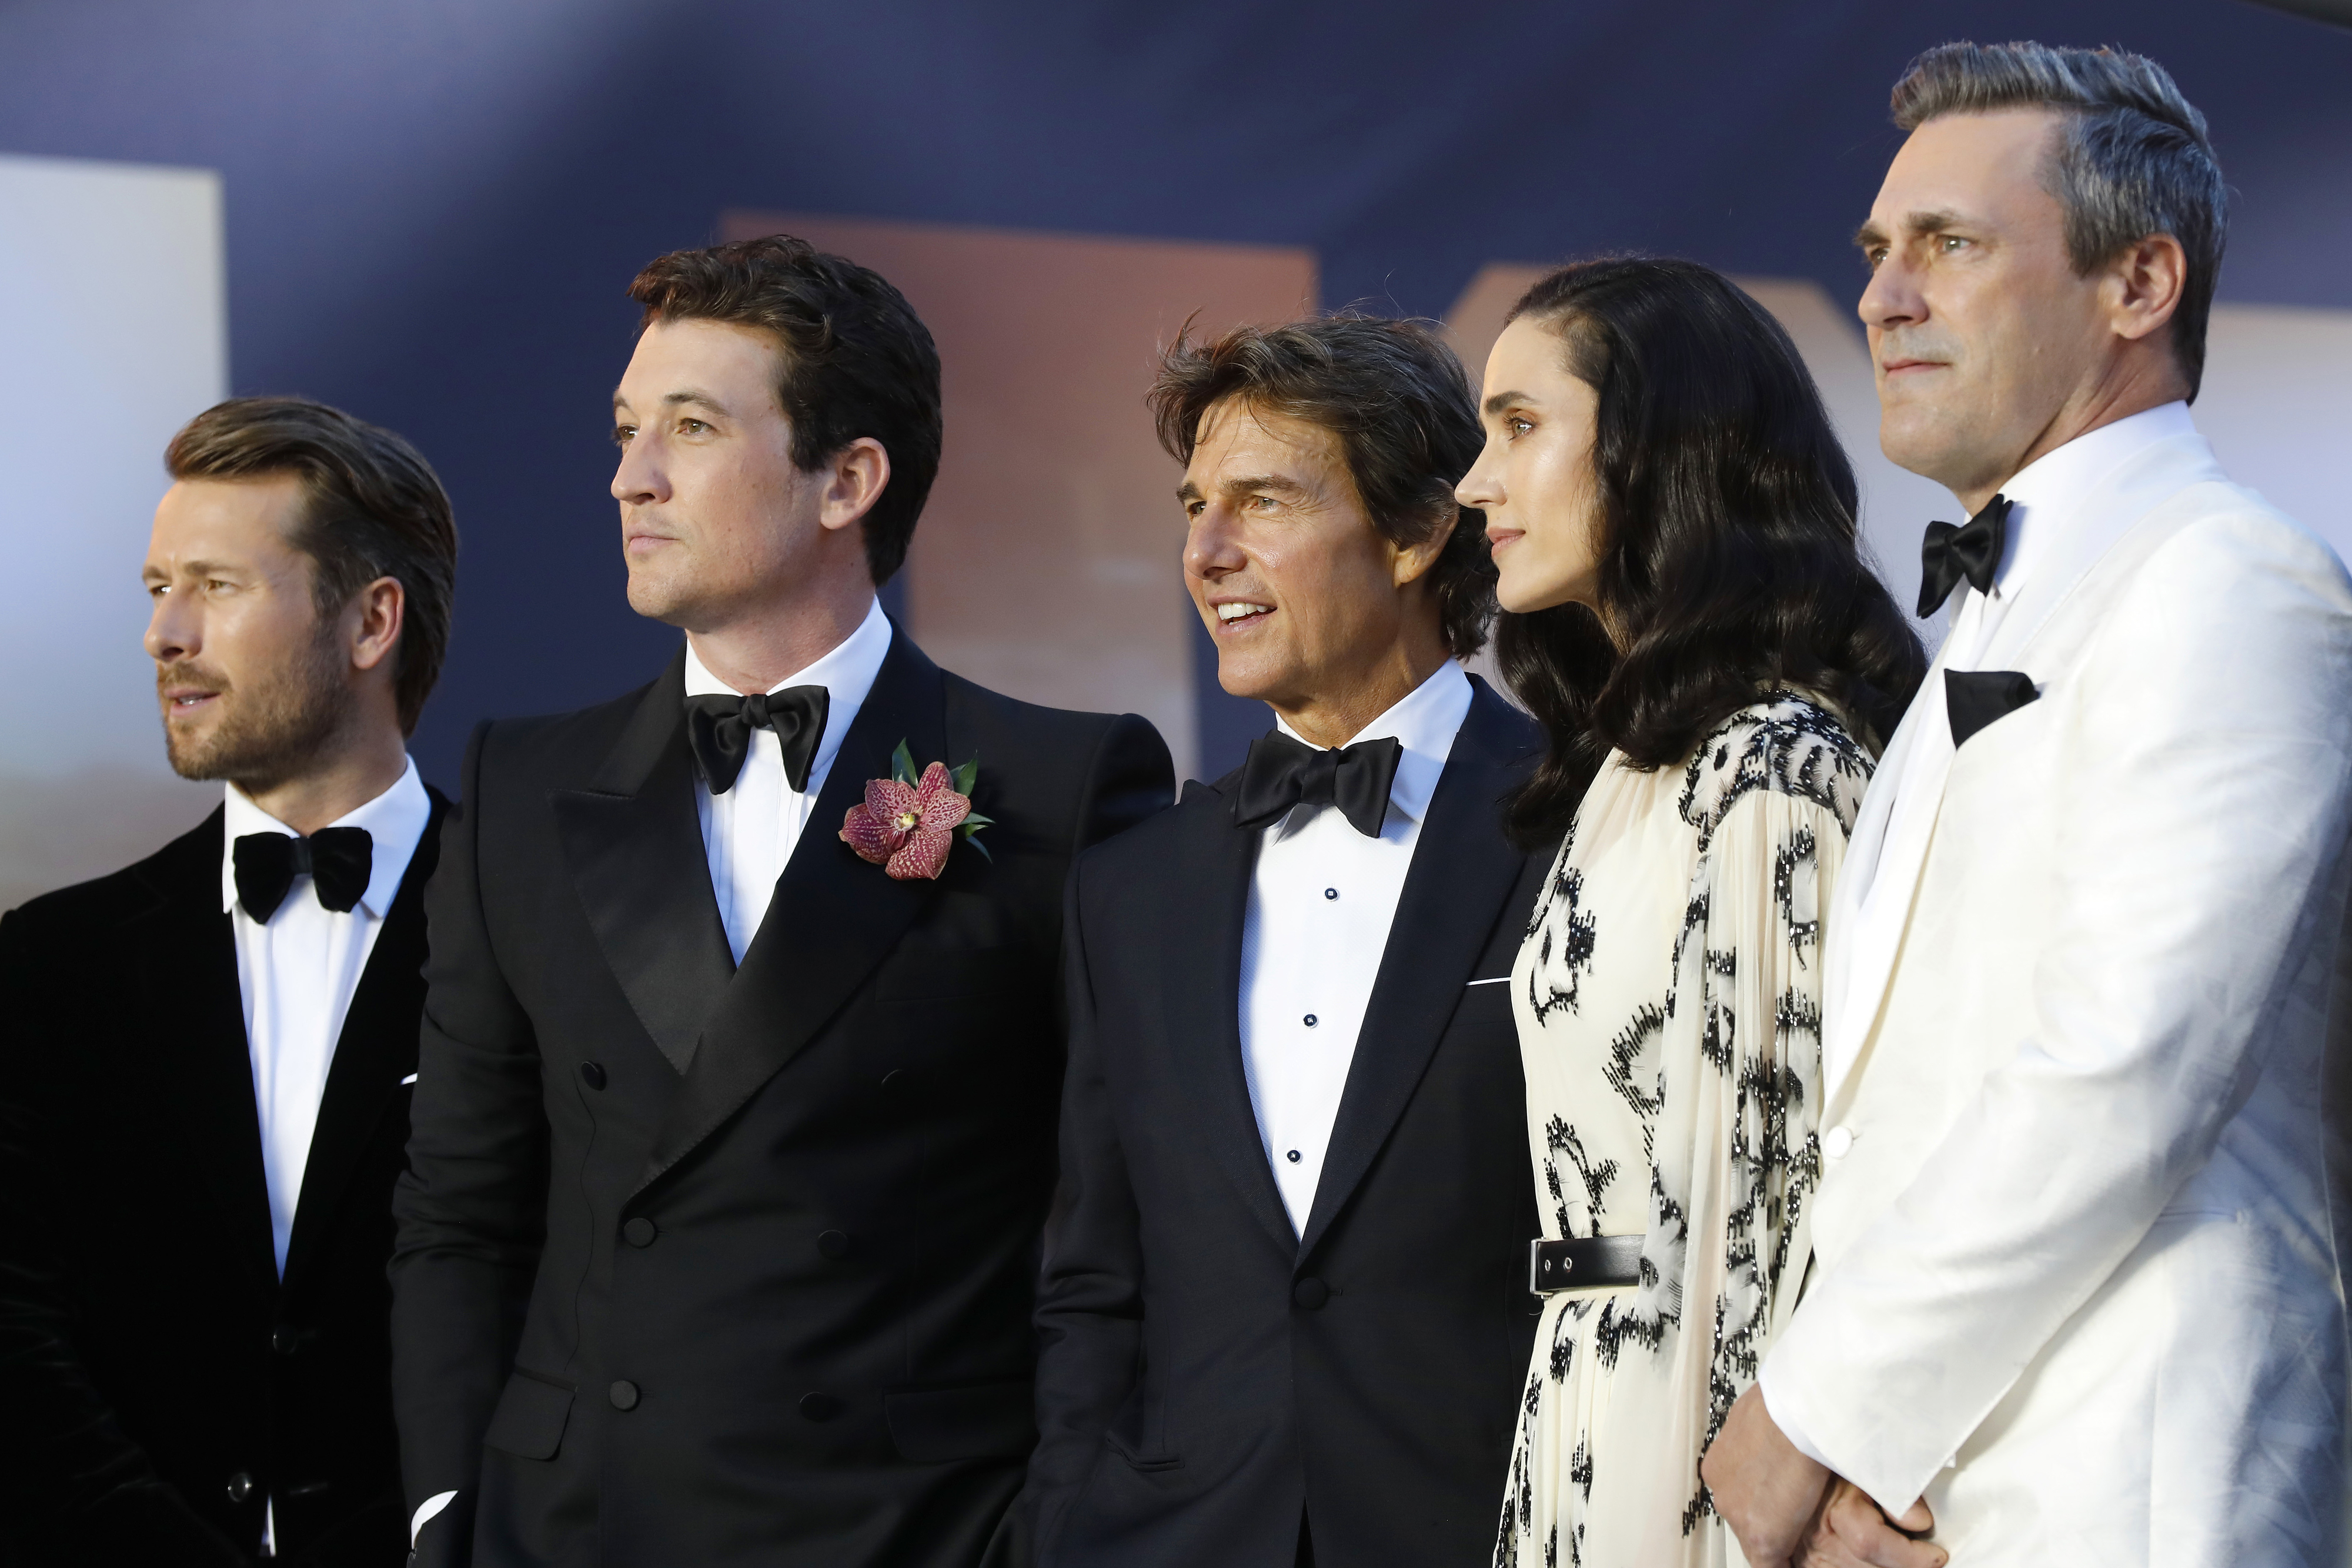 Glen Powell, Miles Teller, Tom Cruise, Jennifer Connelly, and Jon Hamm stand together on the red carpet, dressed in formal attire